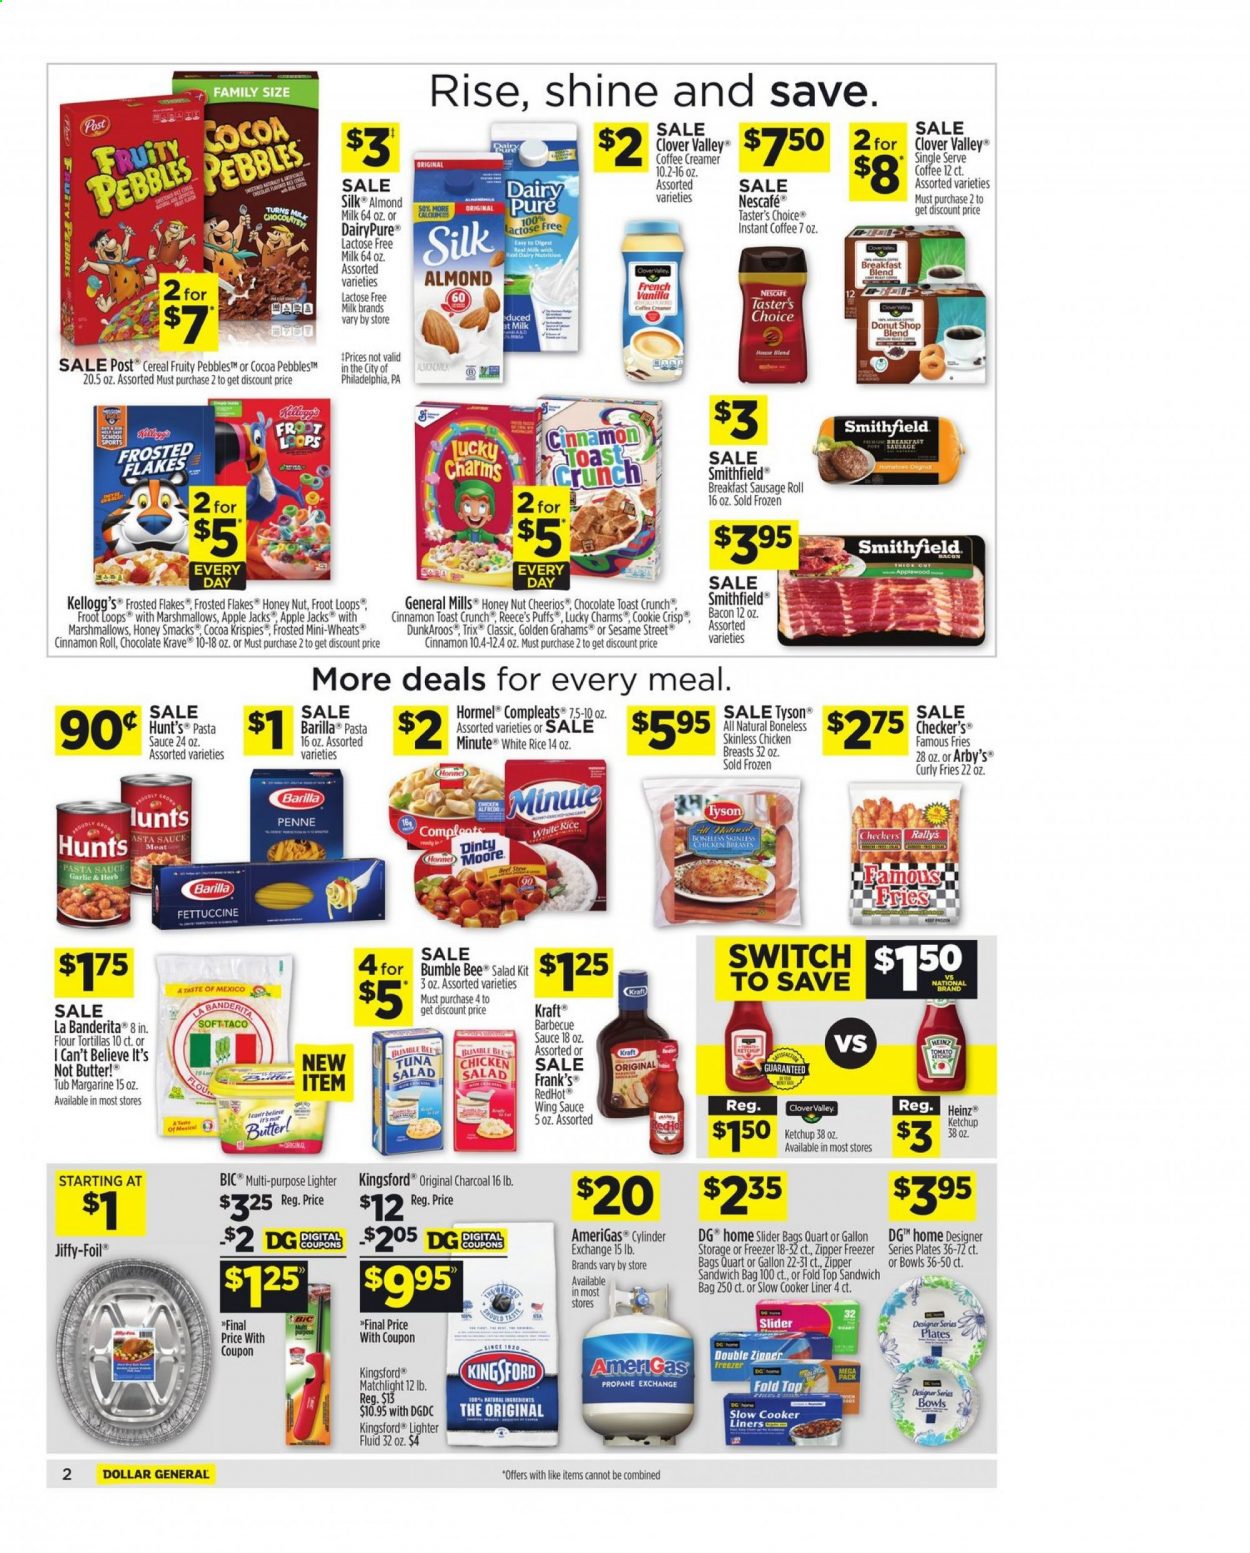 thumbnail - Dollar General Flyer - 05/02/2021 - 05/08/2021 - Sales products - gallon, puffs, sausage rolls, tortillas, flour tortillas, cinnamon roll, salad, tuna, pasta sauce, Bumble Bee, sauce, Barilla, Kraft®, Hormel, bacon, sausage, tuna salad, chicken salad, Clover, almond milk, lactose free milk, butter, margarine, I Can't Believe It's Not Butter, creamer, curly potato fries, potato fries, marshmallows, chocolate, Kellogg's, Sesame Street, Heinz, cereals, Cheerios, Trix, Frosted Flakes, Fruity Pebbles, rice, white rice, penne, BBQ sauce, ketchup, wing sauce, instant coffee, Nescafé, chicken breasts, BIC, sandwich bag, plate, freezer, charcoal, AmeriGas, Kingsford, Jiffy, car battery. Page 3.